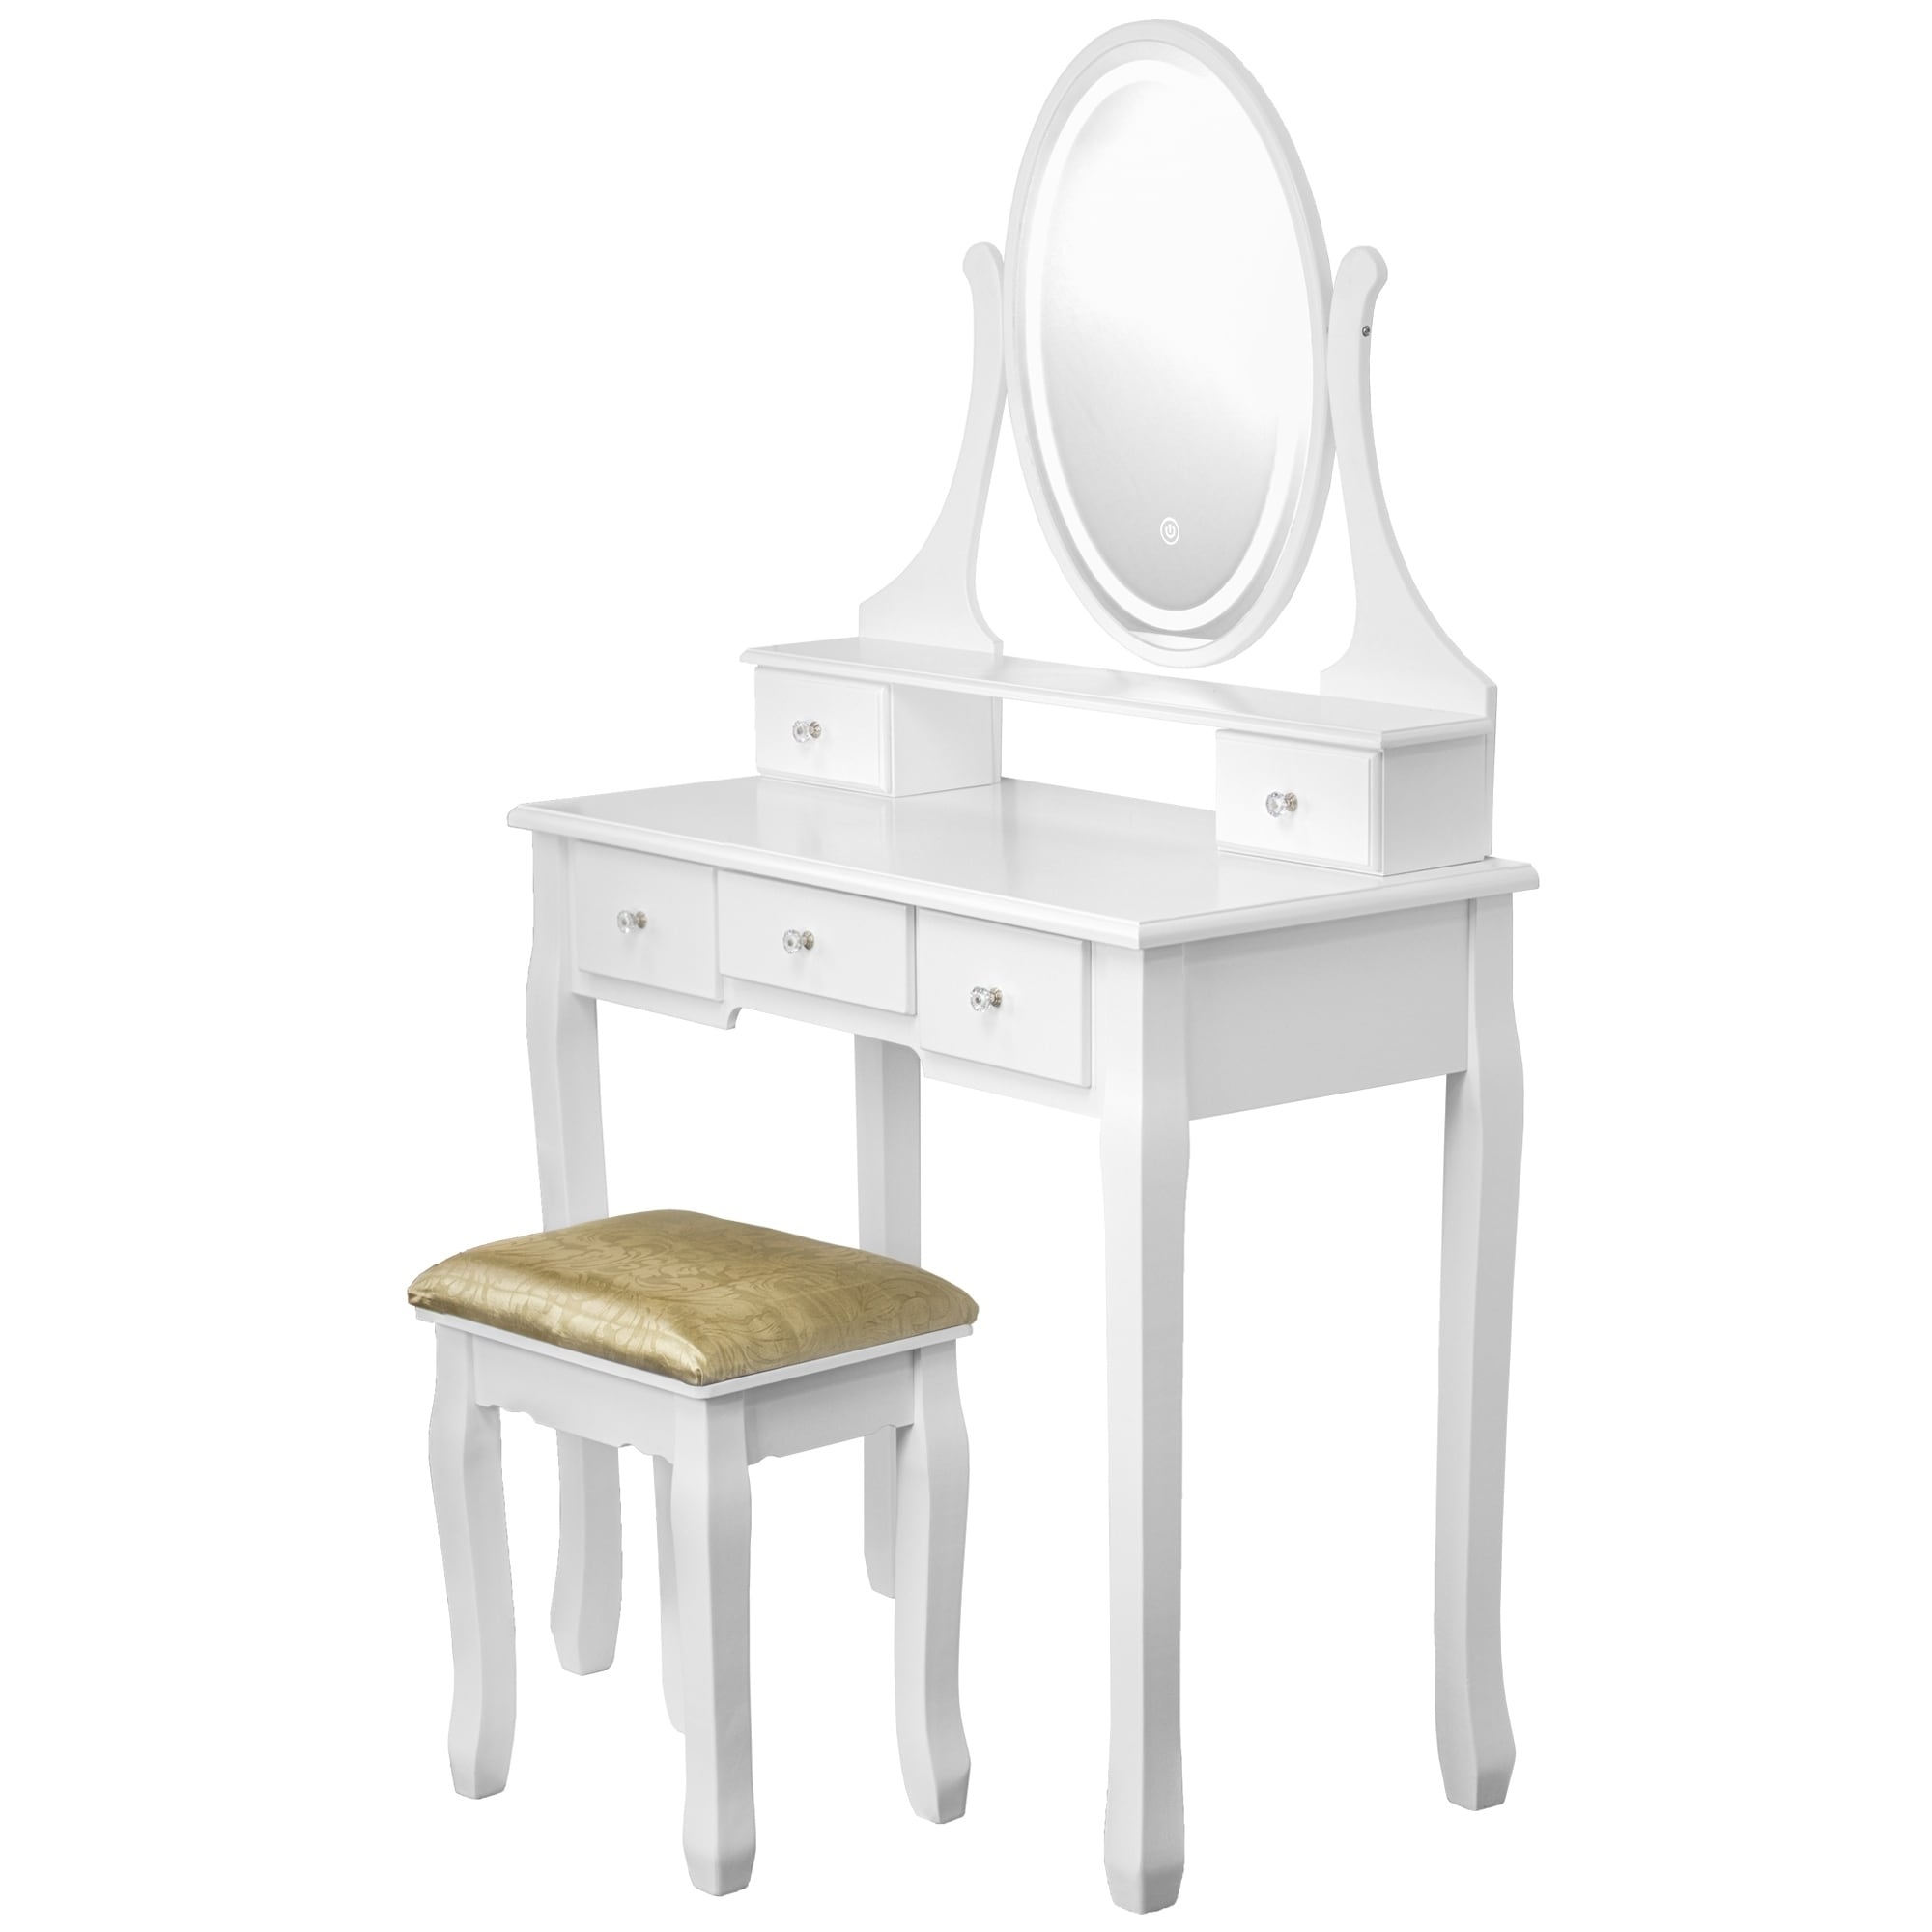 American Art Decor Makeup Vanity Table Set With Light Up Touch Screen Led Oval Mirror